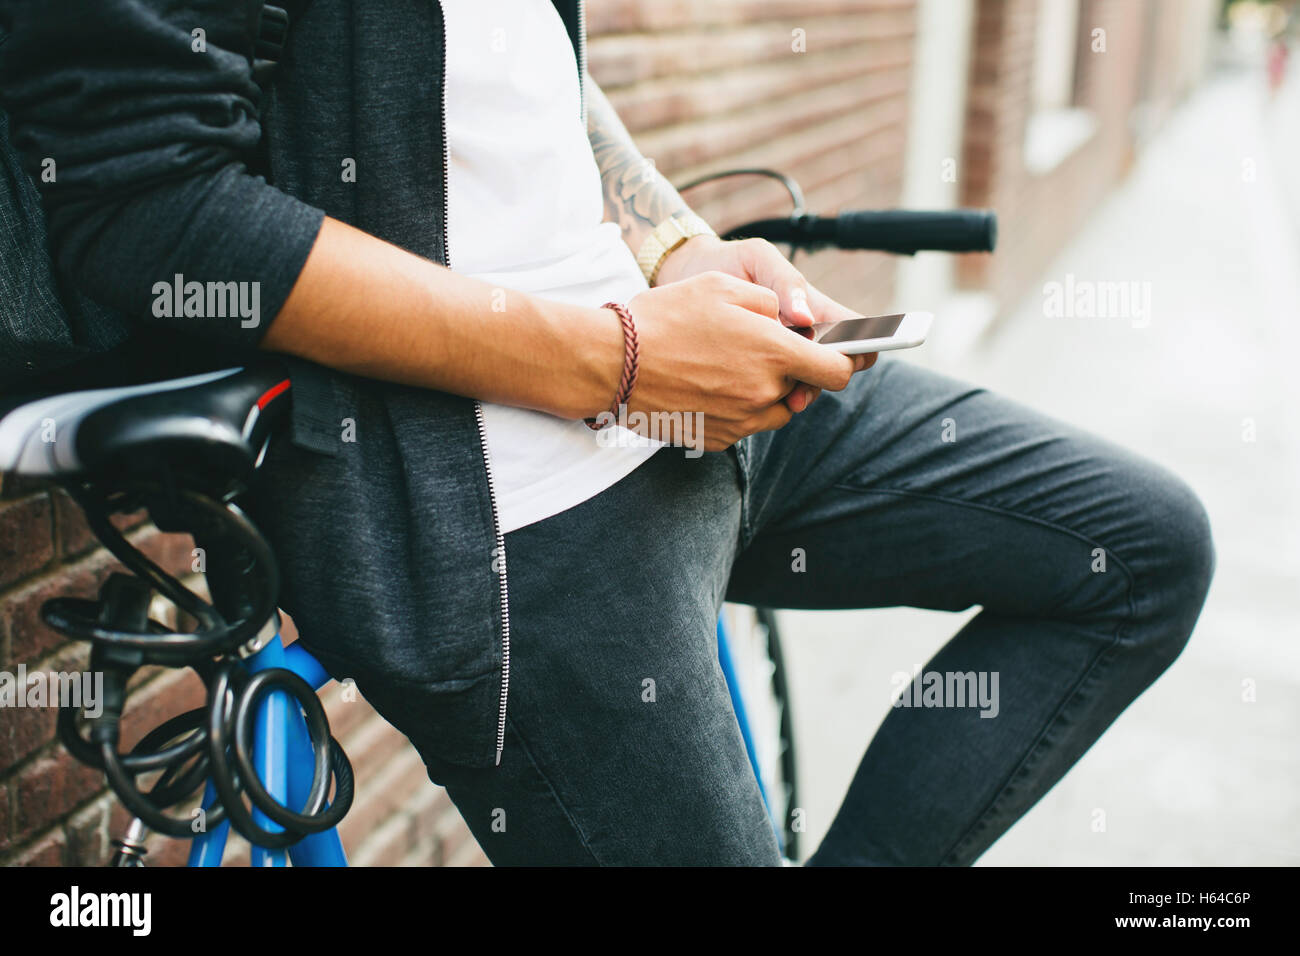 Teenager with a bike in the city, using smartphone Stock Photo